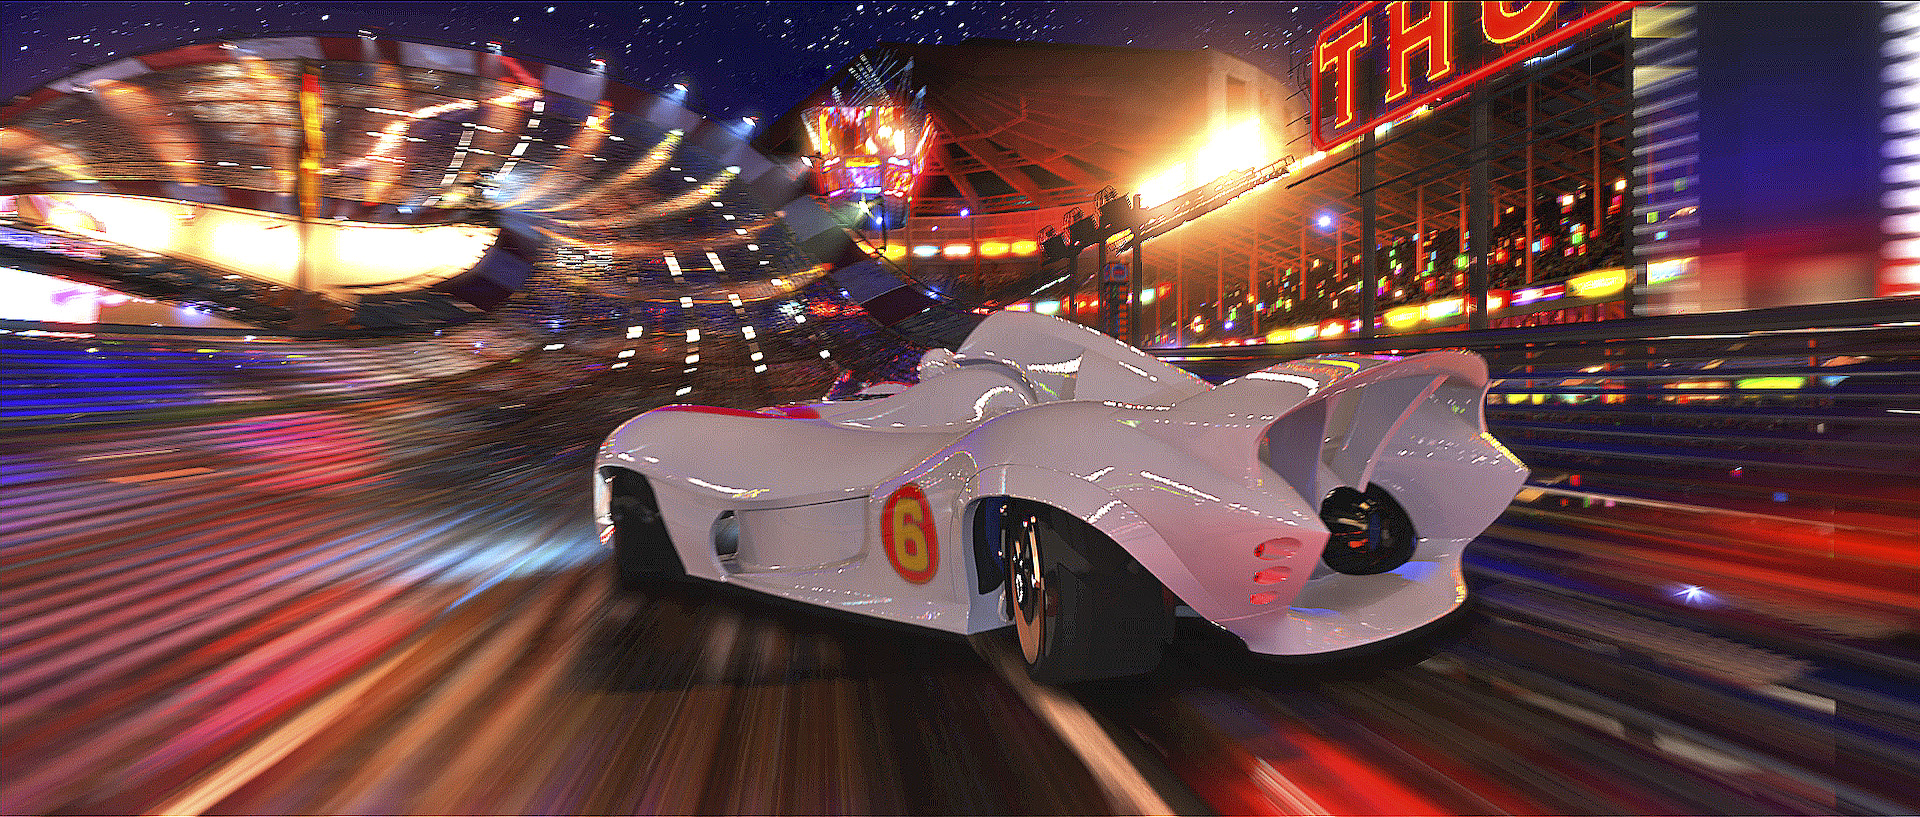 Speed Racer The Movie Free Download